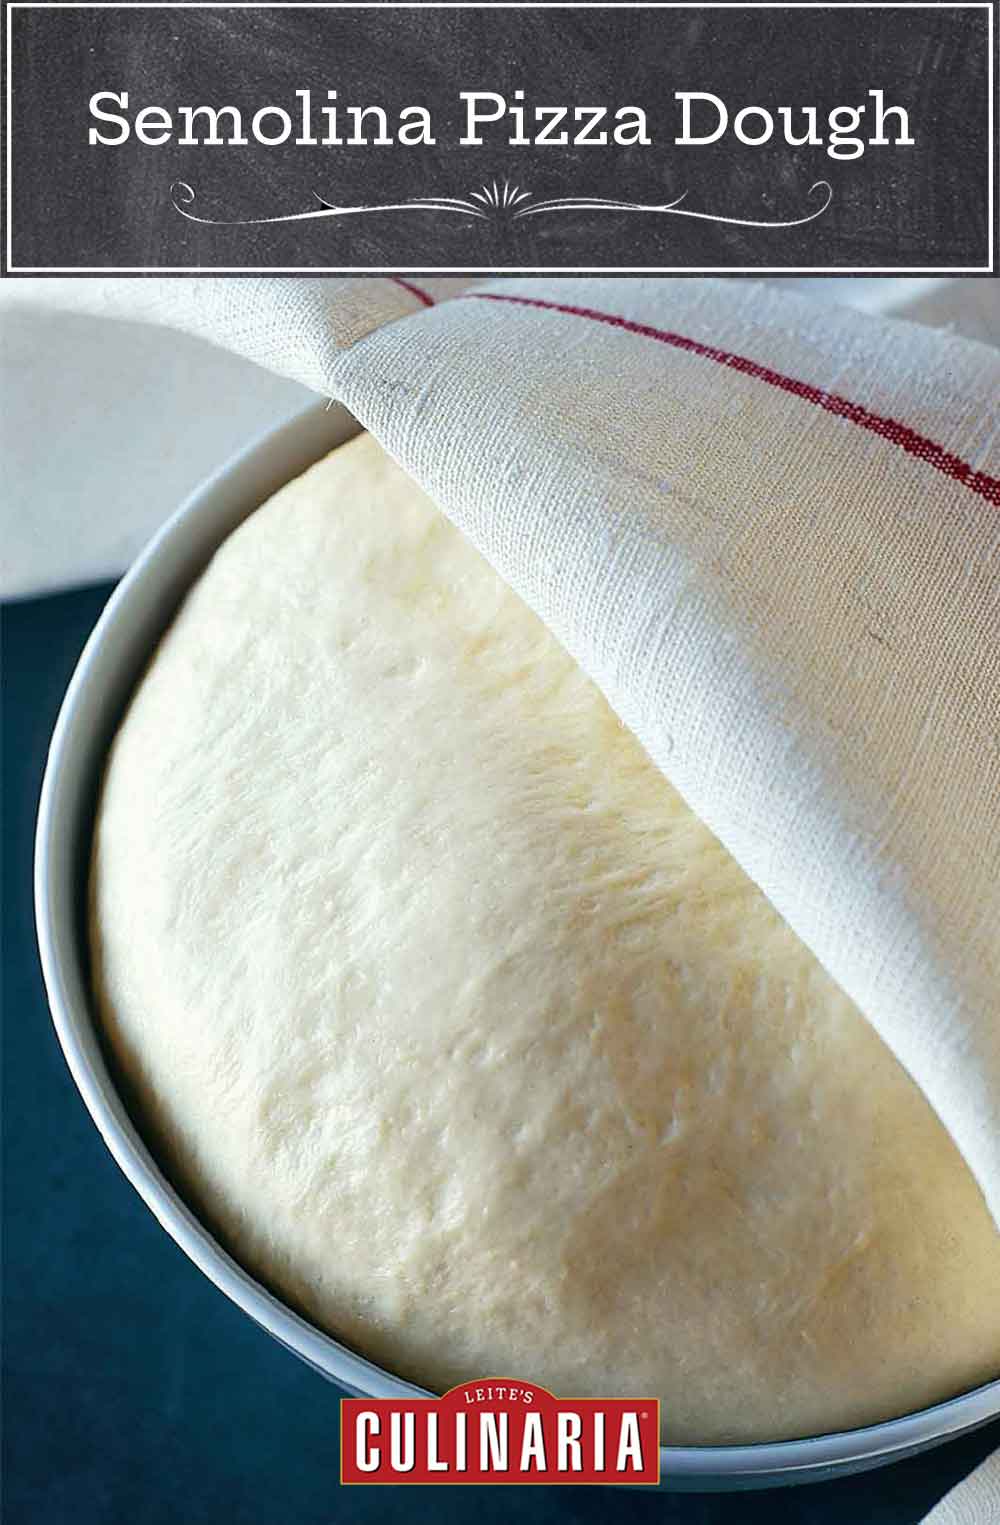 A ball of rising semolina pizza dough in a round metal tin, partially covered by a kitchen towel.